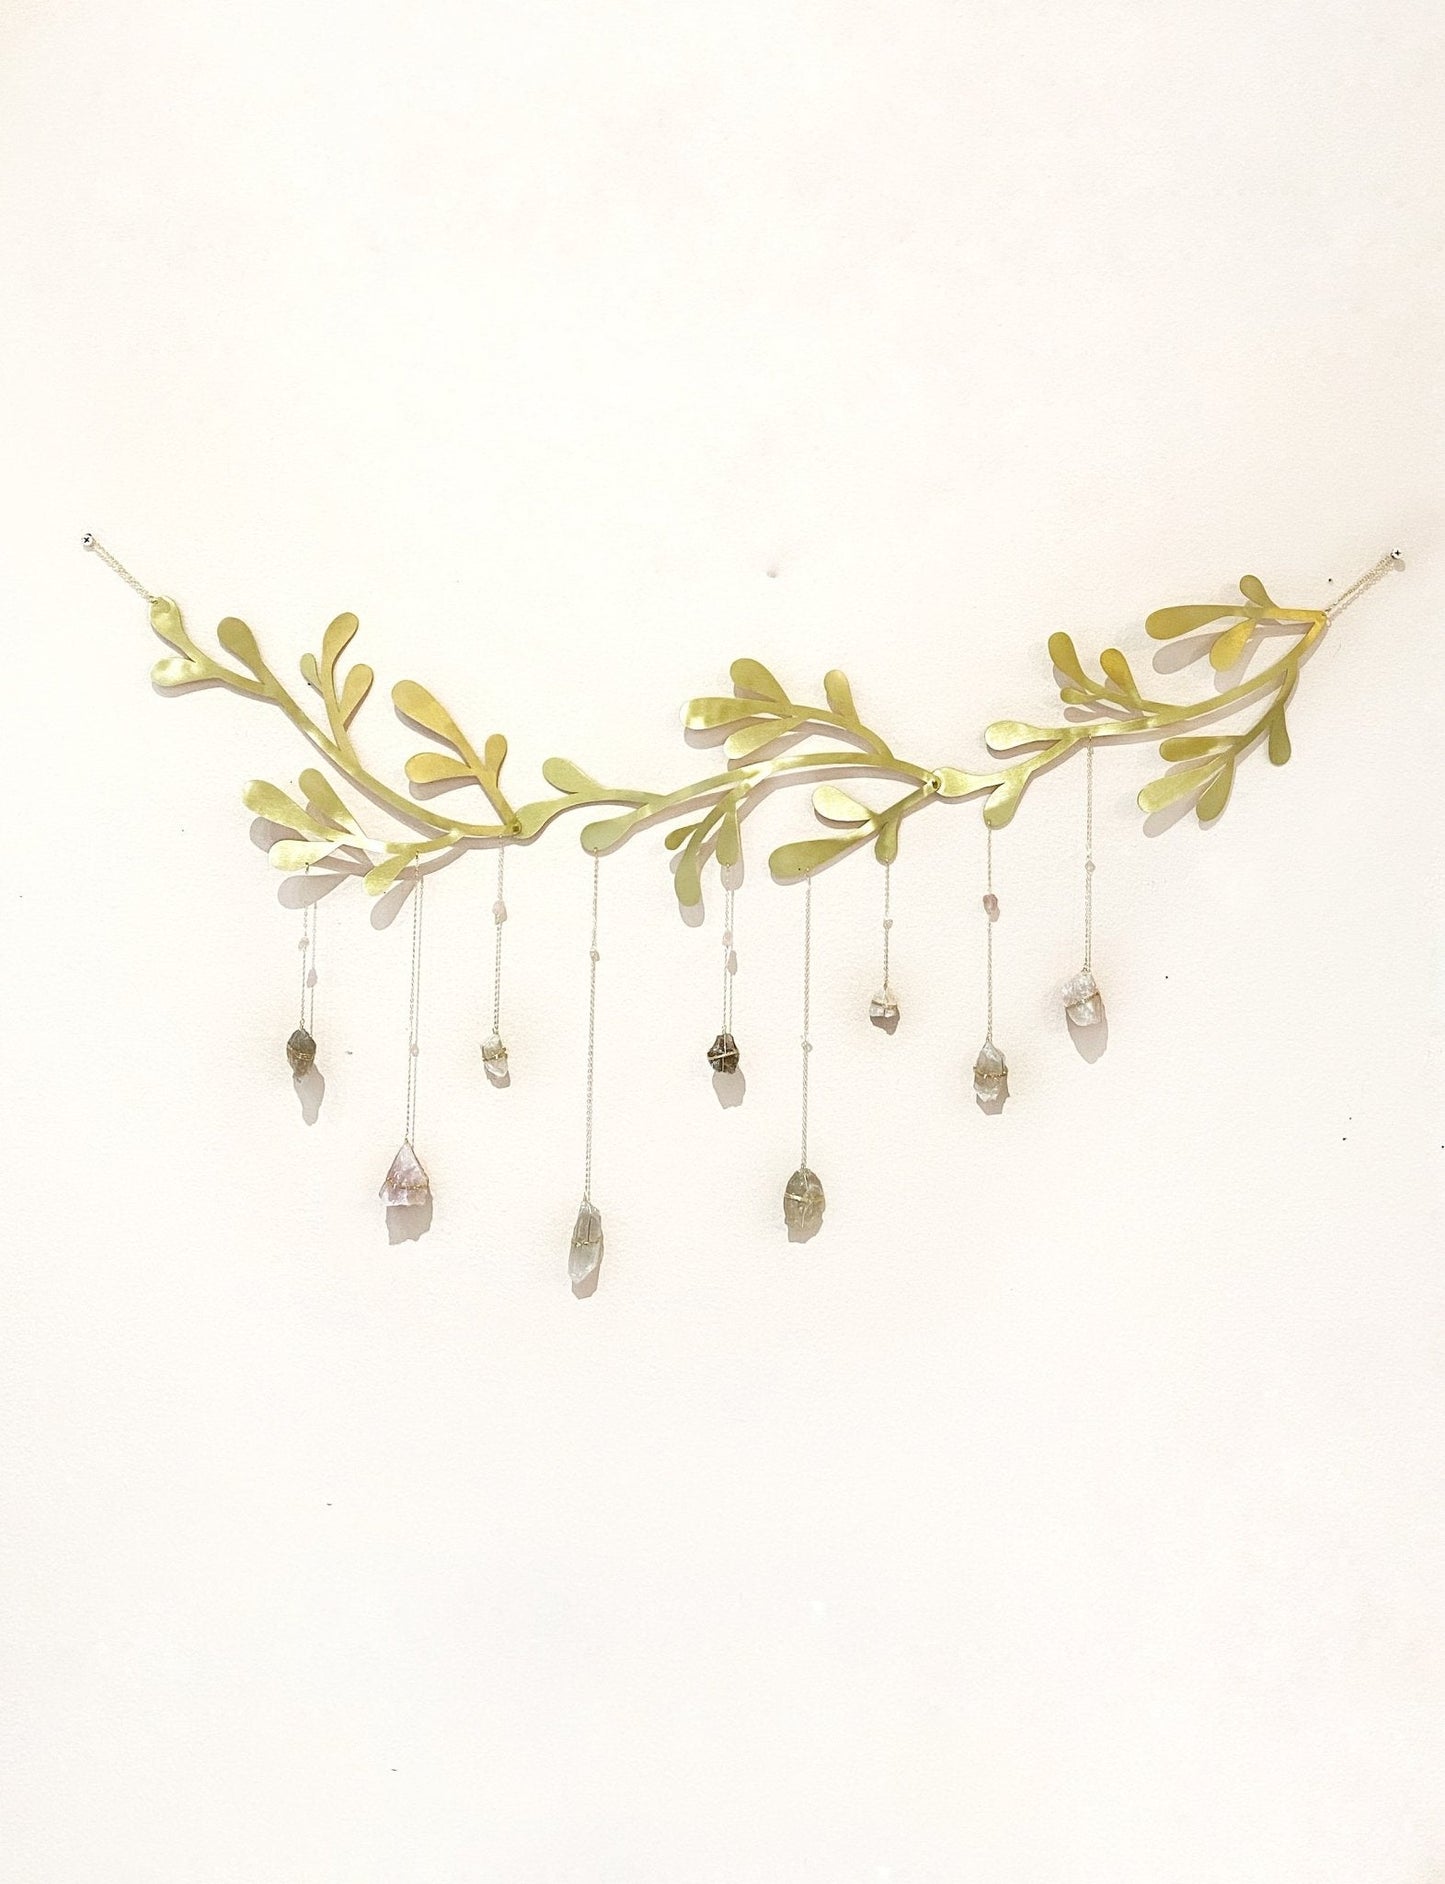 Floral Vines Healing Crystal Garland by Ariana Ost